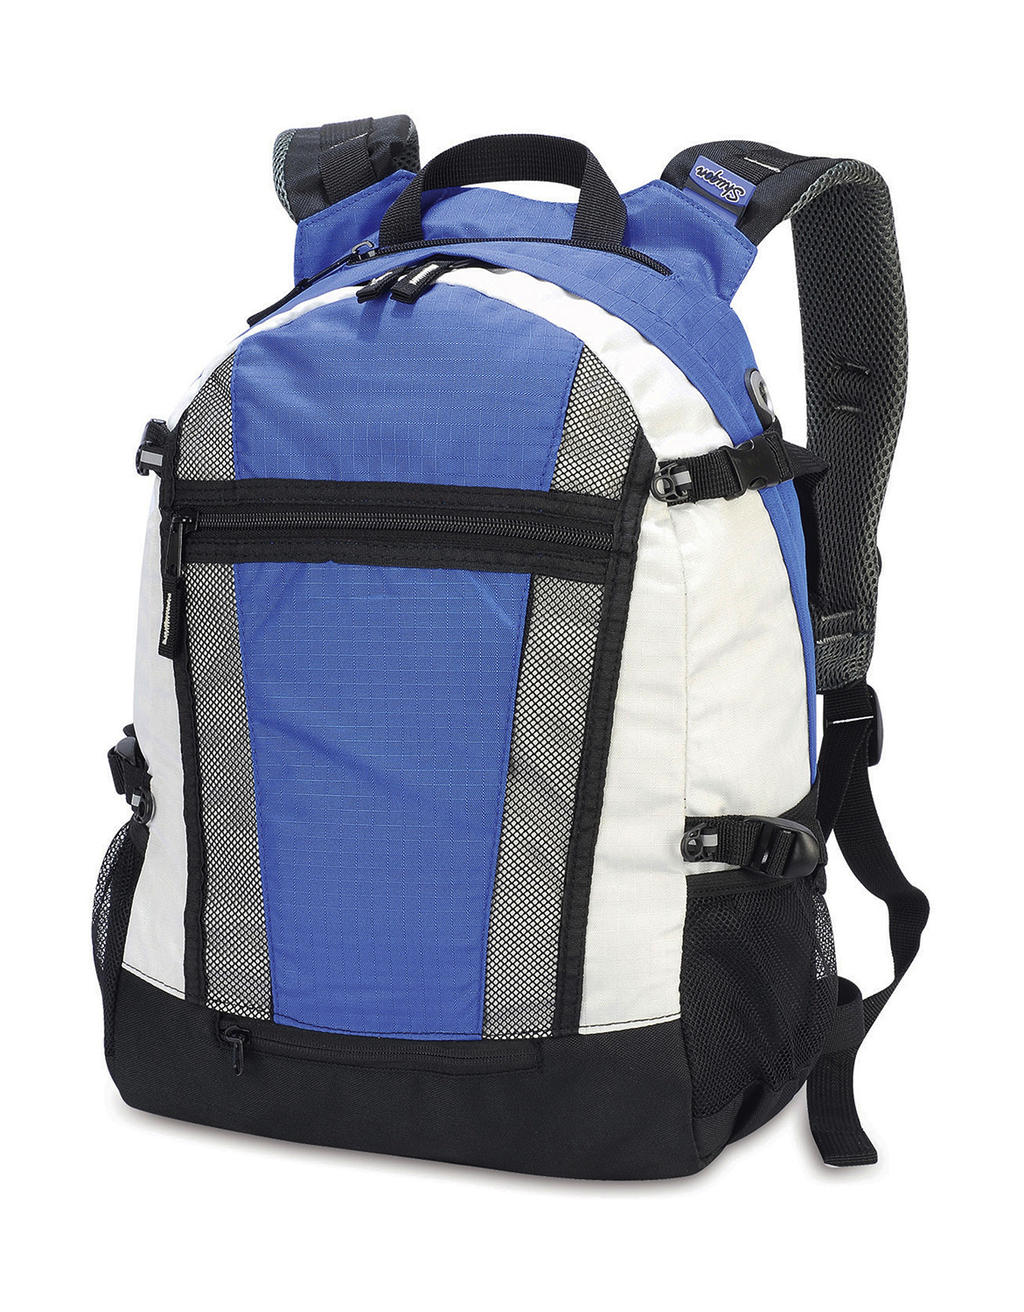  Indiana Student/ Sports Backpack in Farbe Royal/Off White